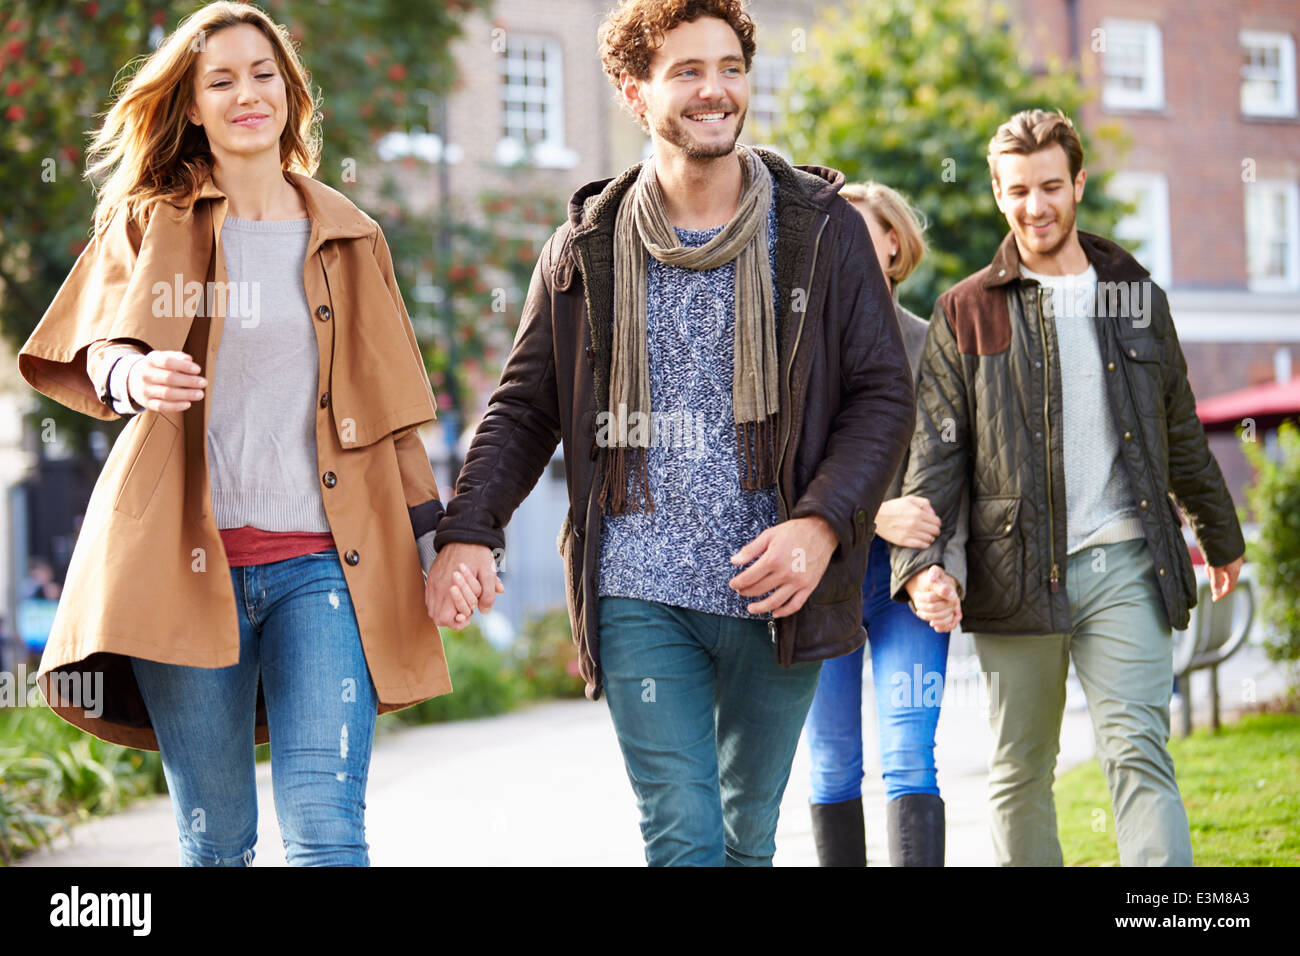 Group Of Friends Walking Through City Park Together Stock Photo